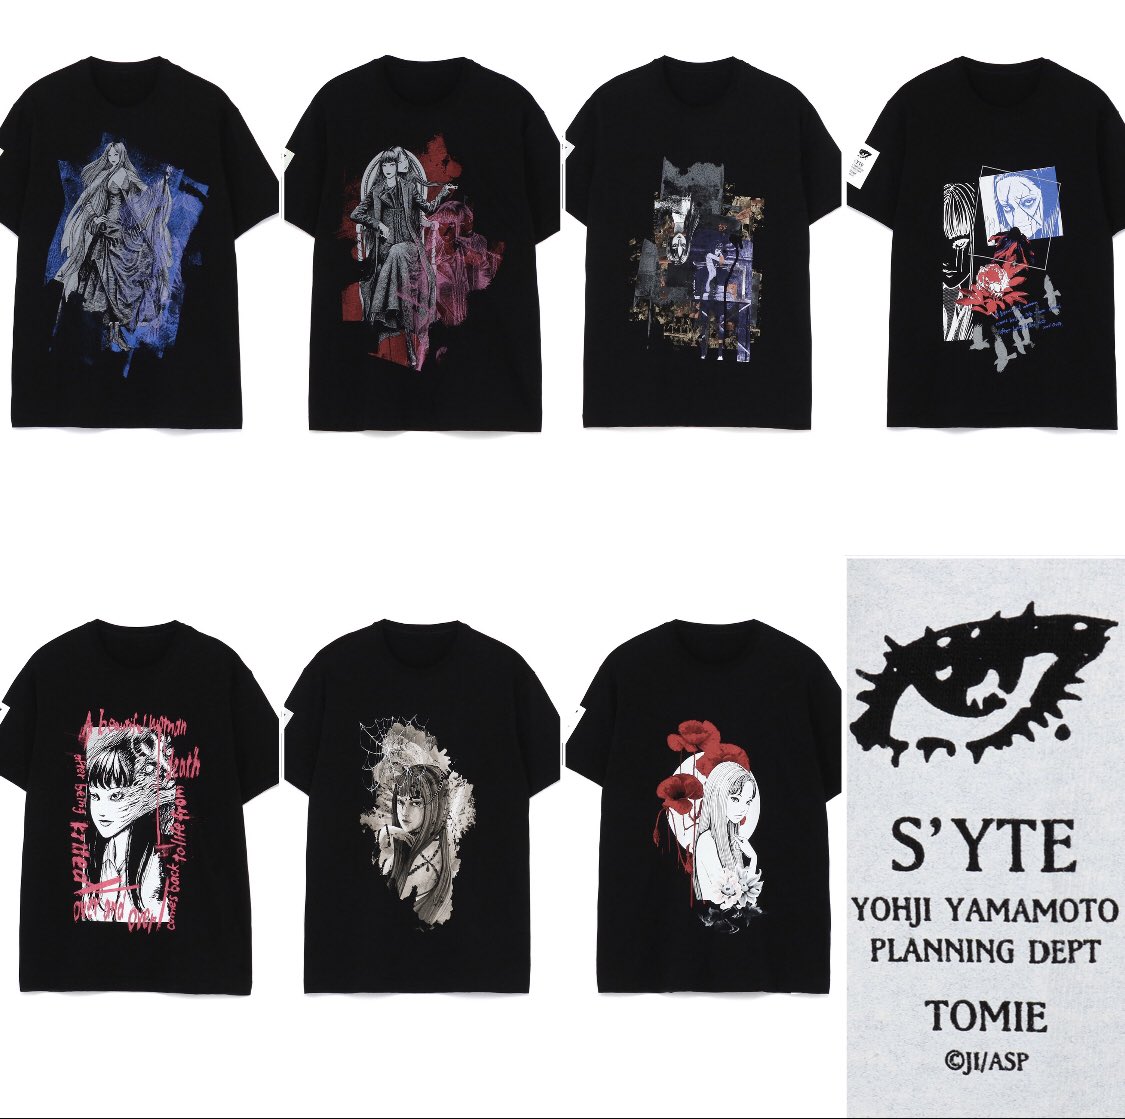 S'YTE Taps Junji Ito For Graphic-Led Collection